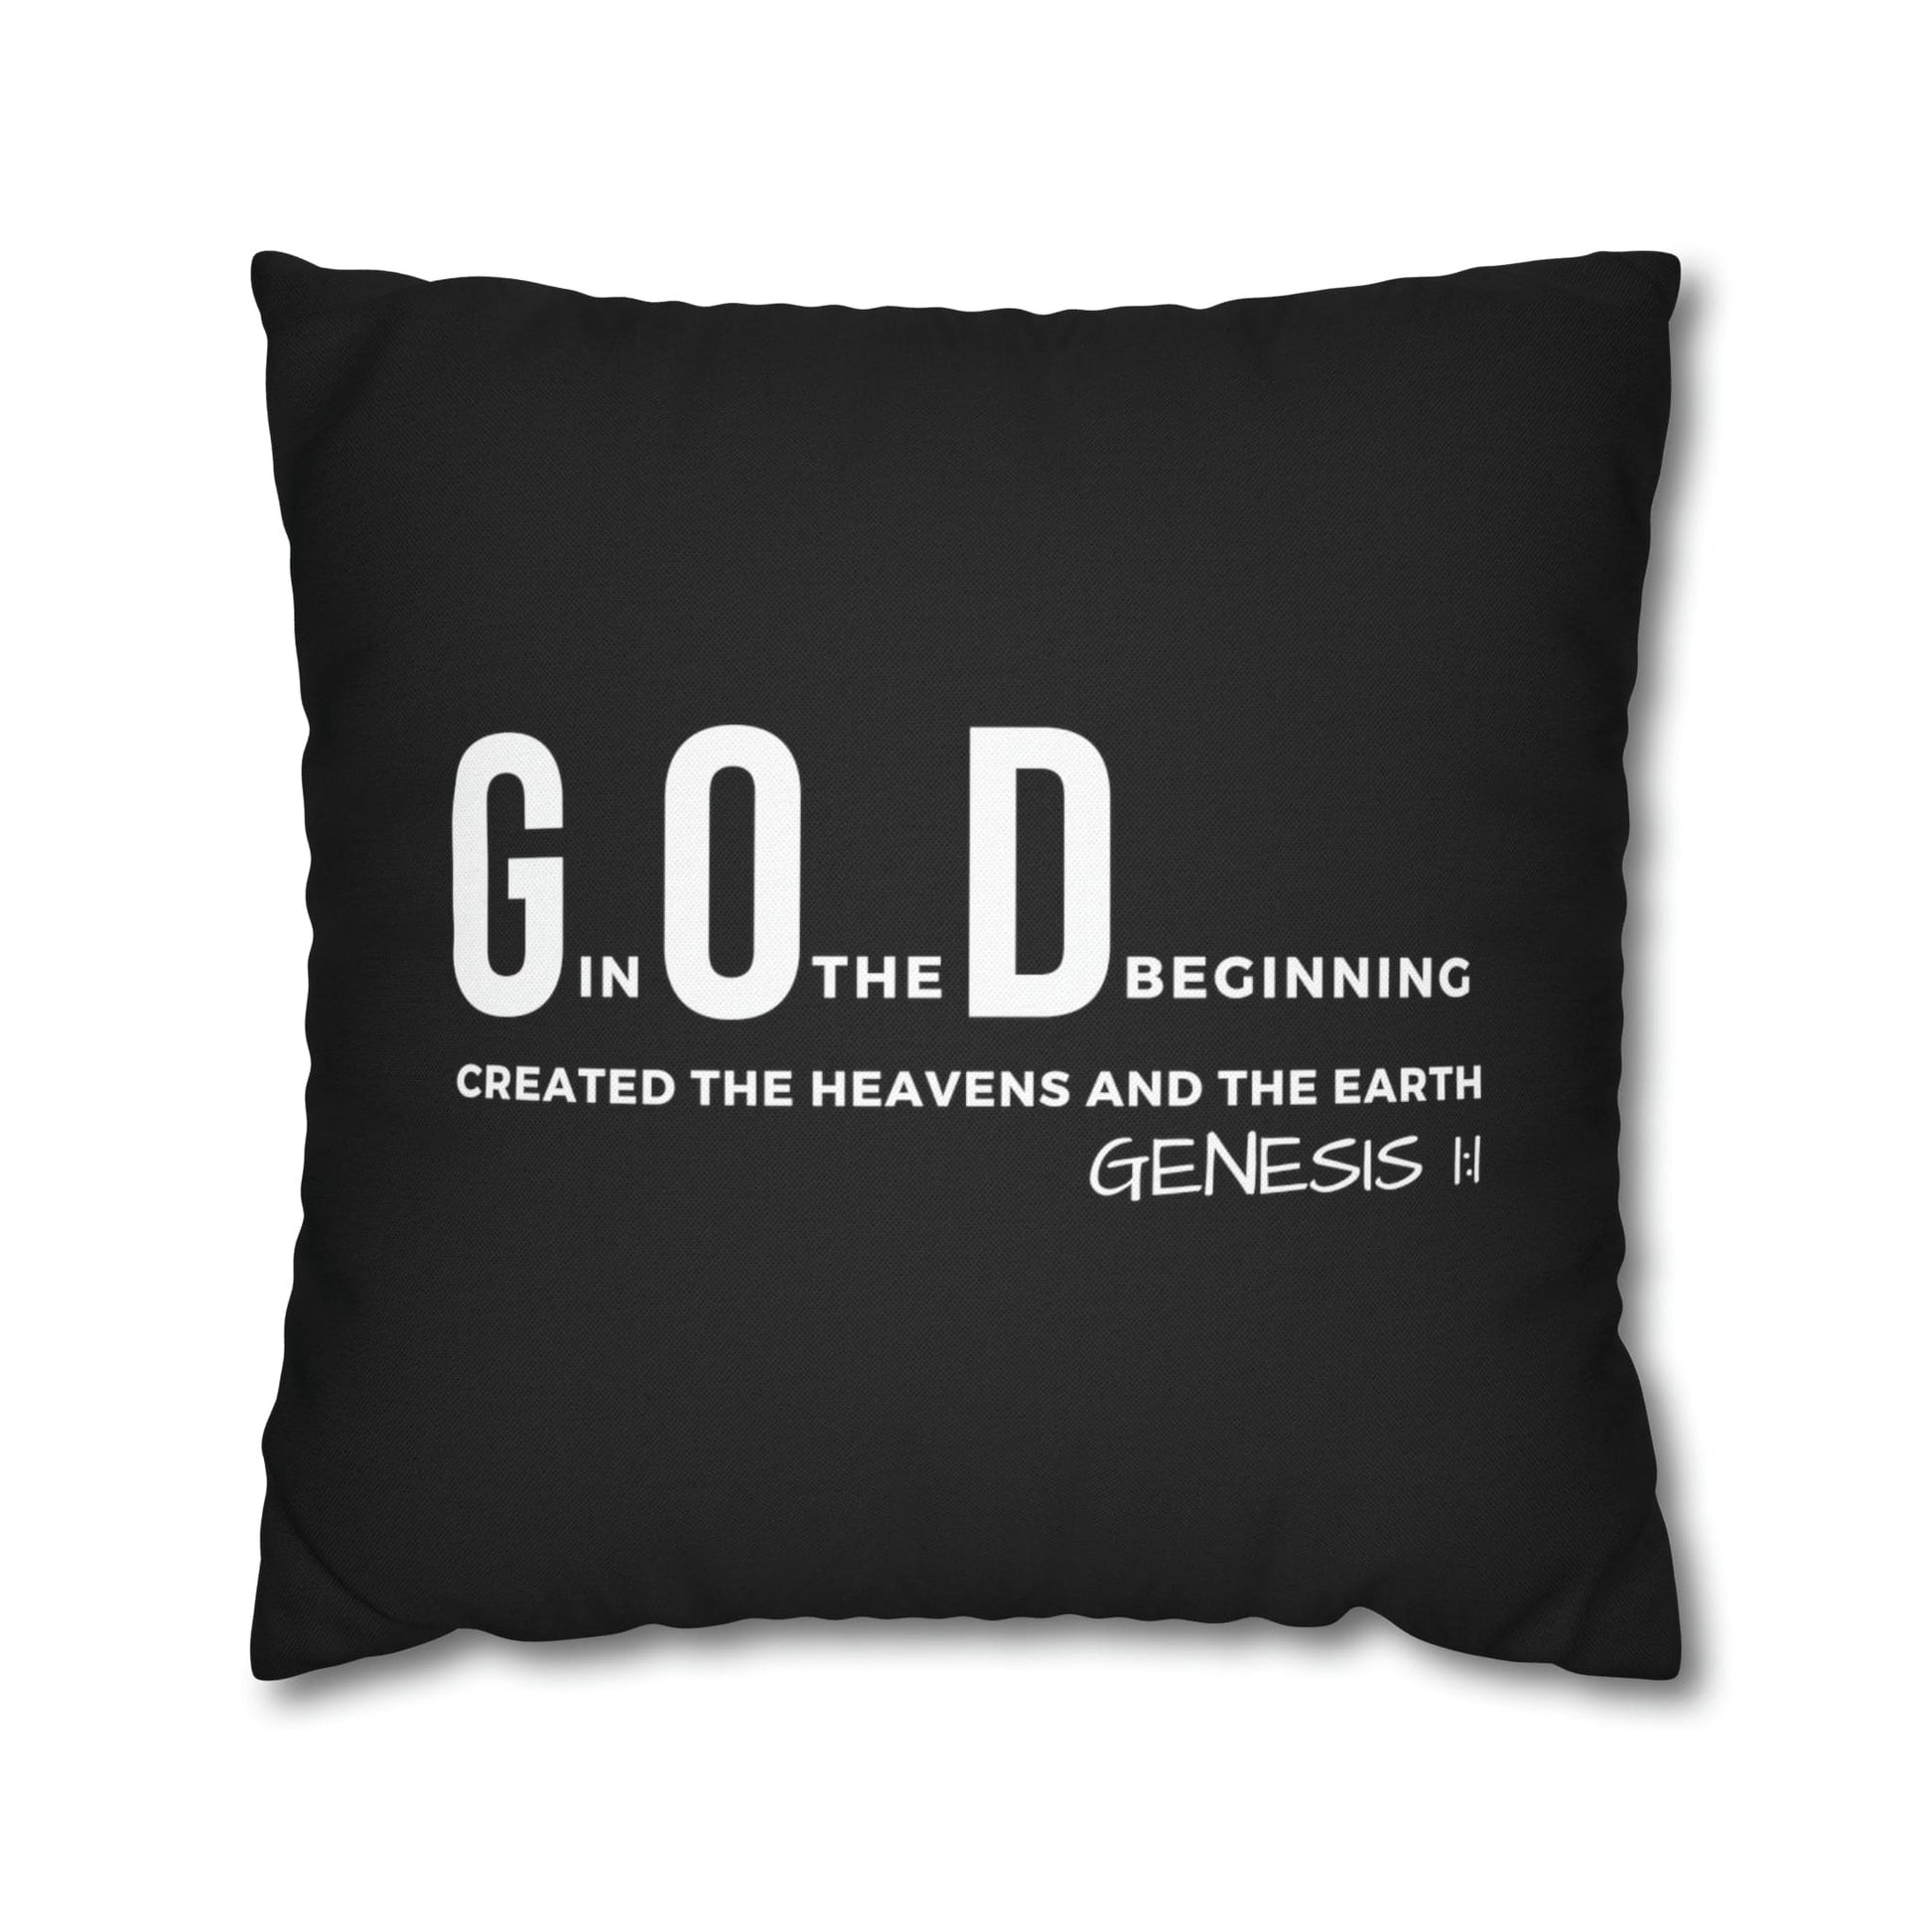 Decorative Throw Pillow Cover - Set Of 2, God In The Beginning Created The Heavens And The Earth - Scripture Verse-0